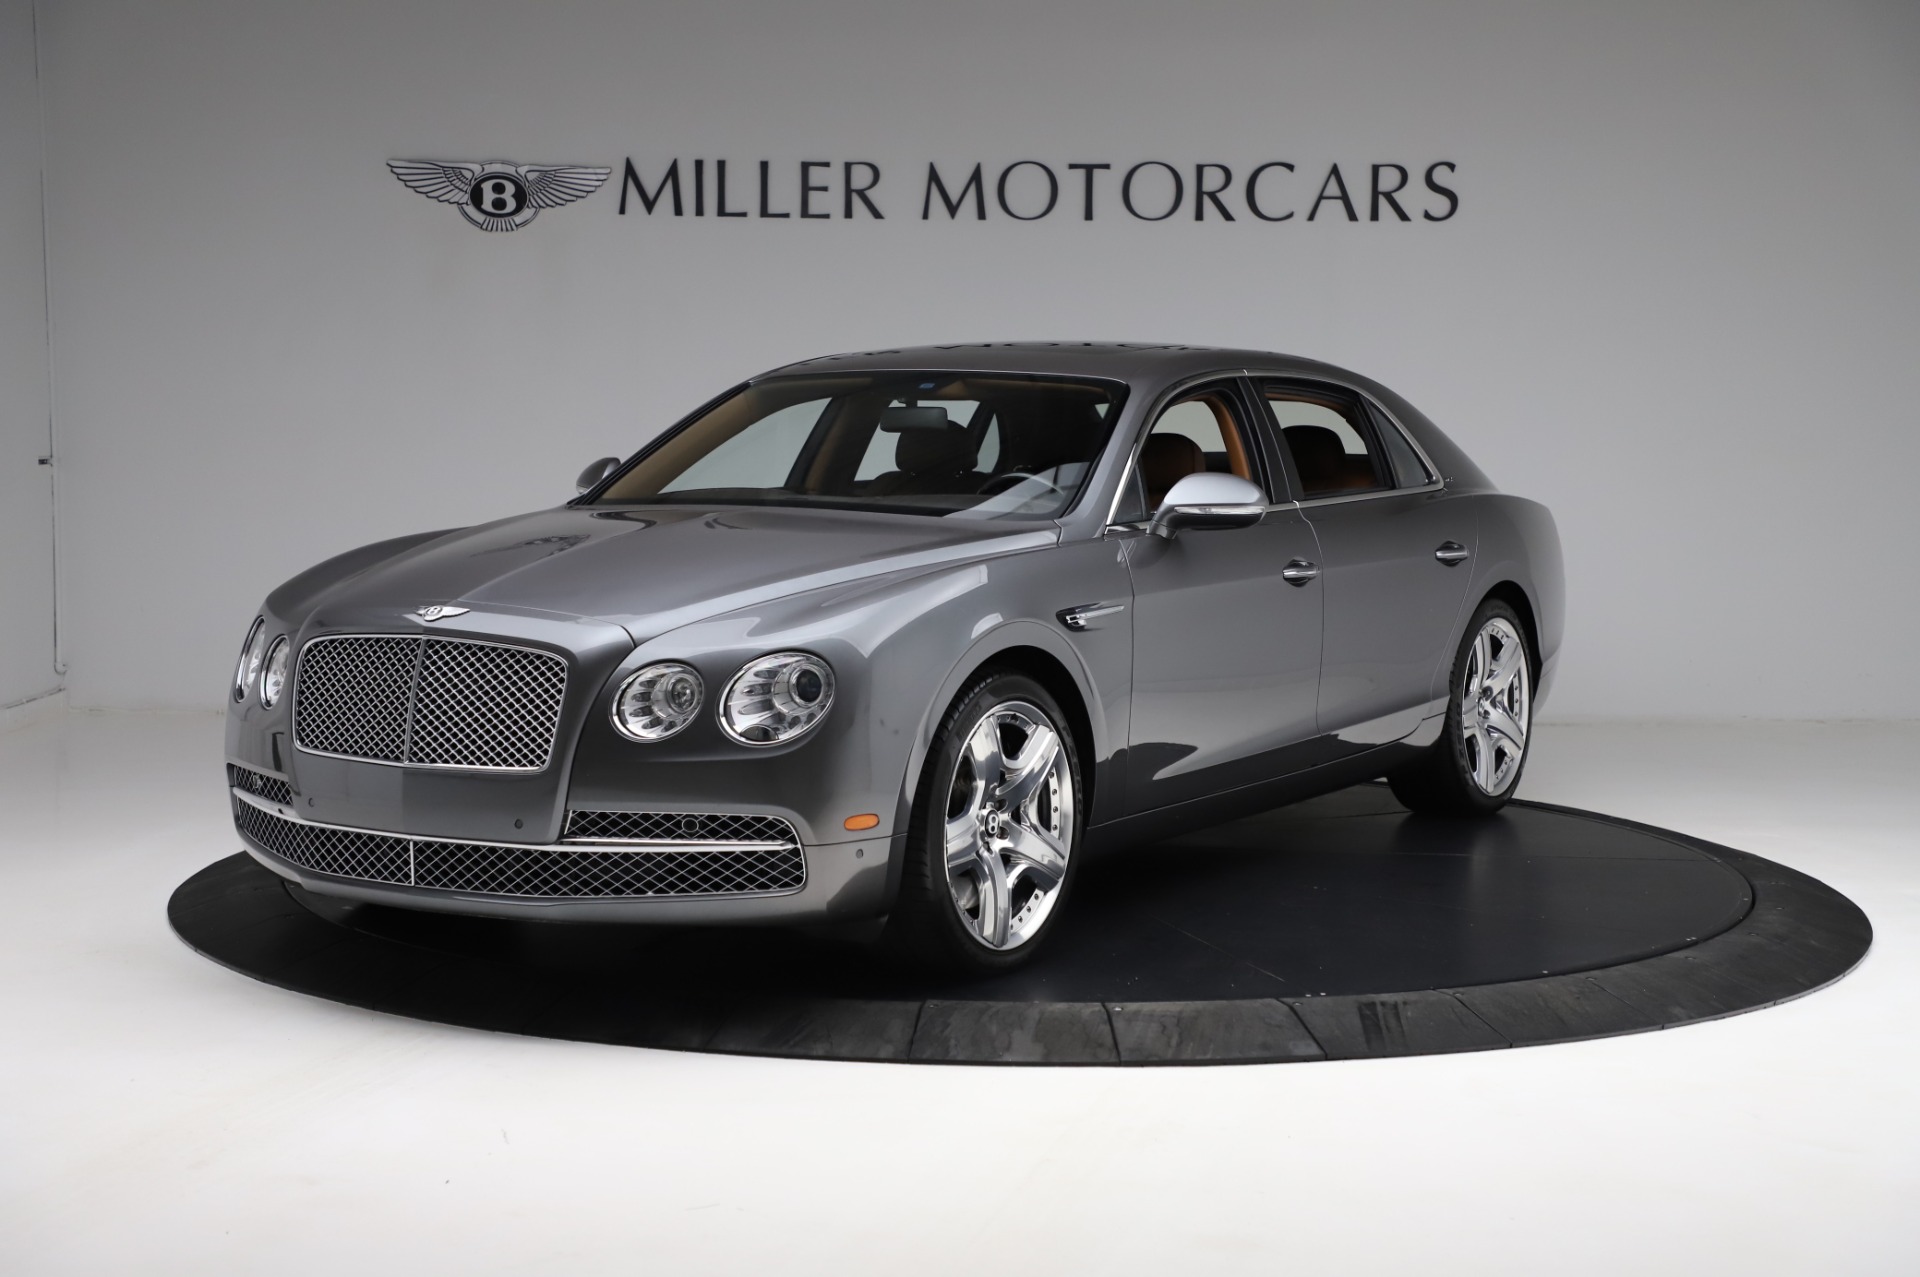 Used 2014 Bentley Flying Spur W12 for sale Sold at Rolls-Royce Motor Cars Greenwich in Greenwich CT 06830 1